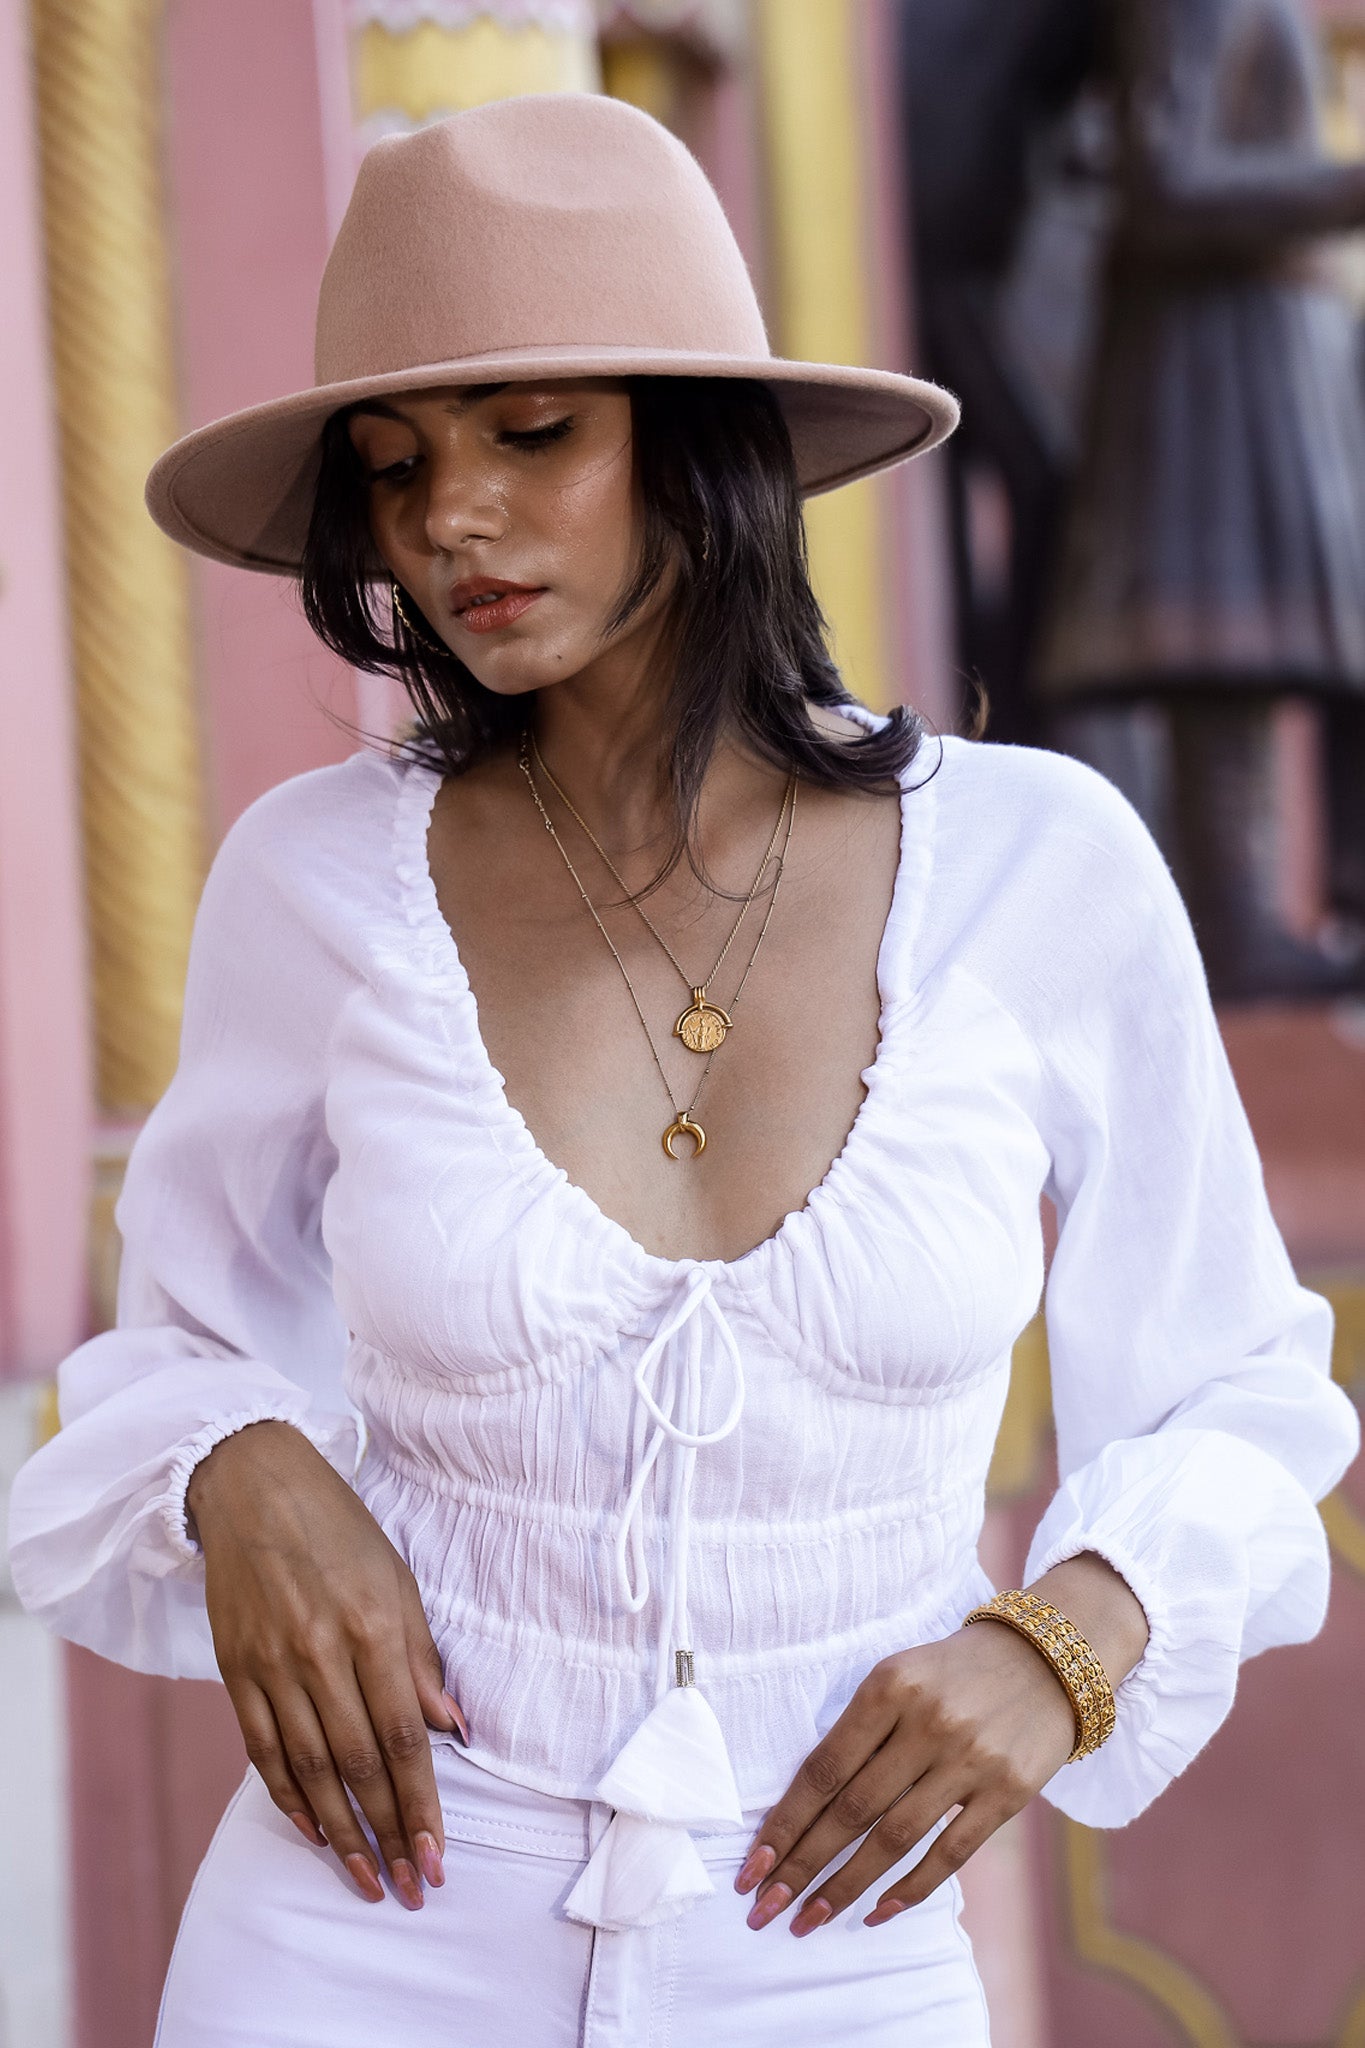 THE PATTY BOHO WHITE PEASANT TOP – Must Love Travel Clothing